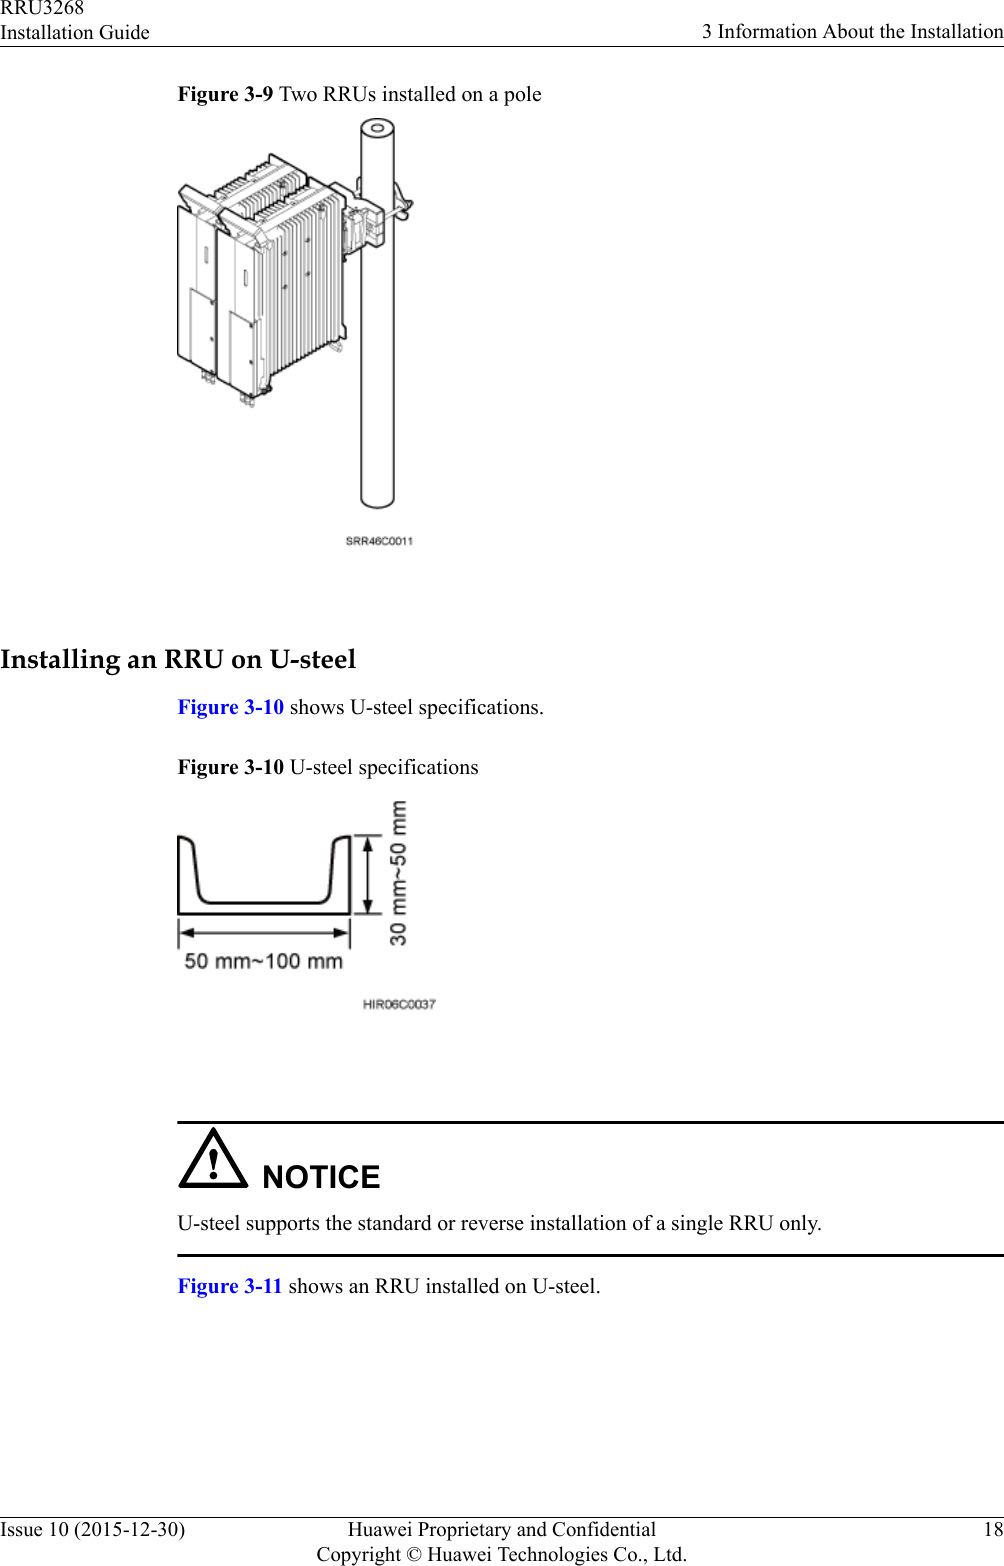 Figure 3-9 Two RRUs installed on a pole Installing an RRU on U-steelFigure 3-10 shows U-steel specifications.Figure 3-10 U-steel specifications NOTICEU-steel supports the standard or reverse installation of a single RRU only.Figure 3-11 shows an RRU installed on U-steel.RRU3268Installation Guide 3 Information About the InstallationIssue 10 (2015-12-30) Huawei Proprietary and ConfidentialCopyright © Huawei Technologies Co., Ltd.18